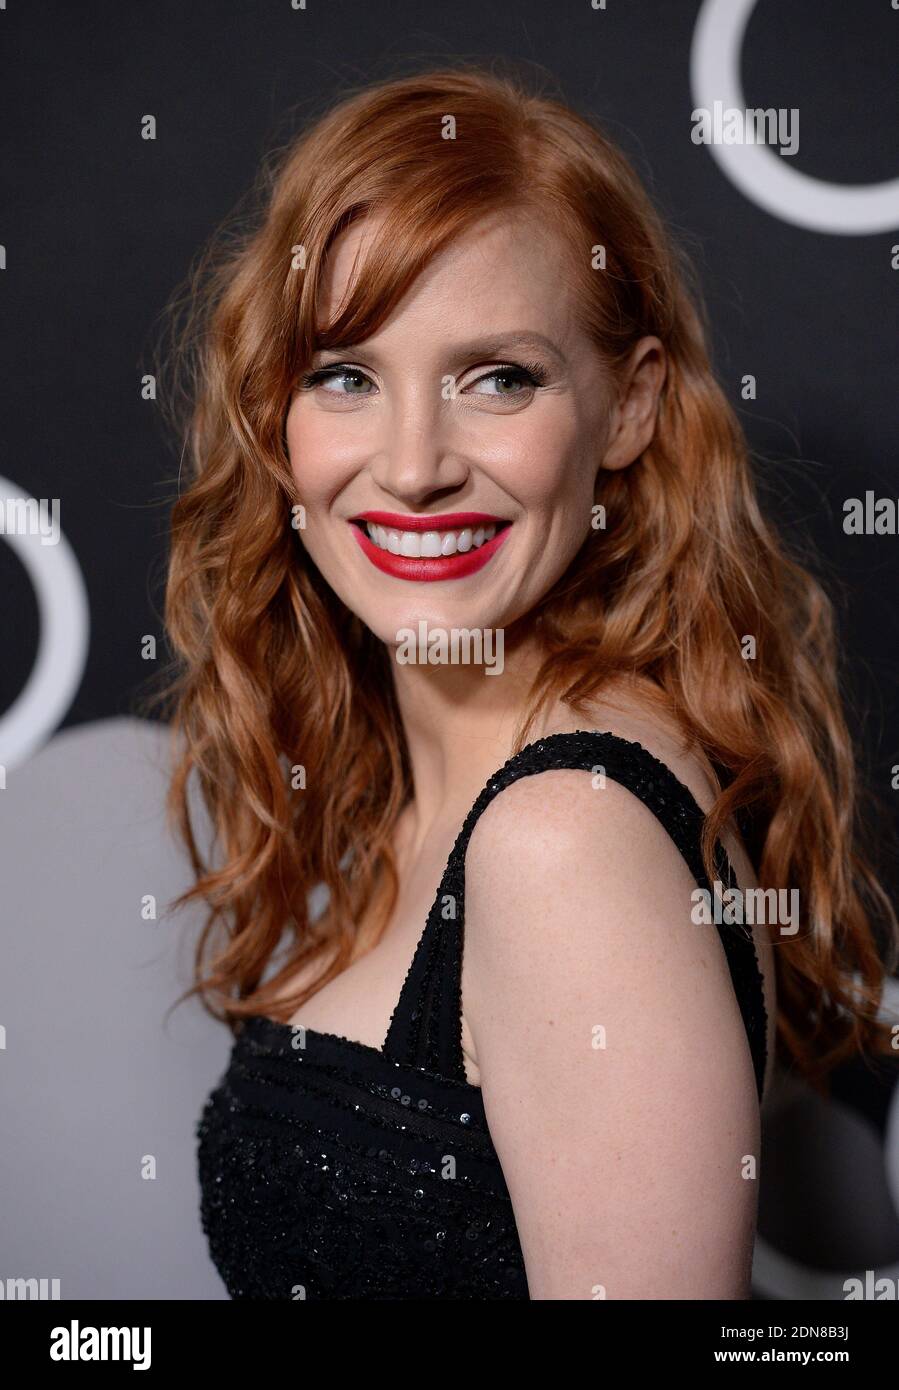 Jessica Chastain attends Audi celebrates Golden Globes Week 2015 at Cecconi's Restaurant in Los Angeles, CA, USA, on January 8, 2015. Photo by Lionel Hahn/ABACAPRESS.COM Stock Photo